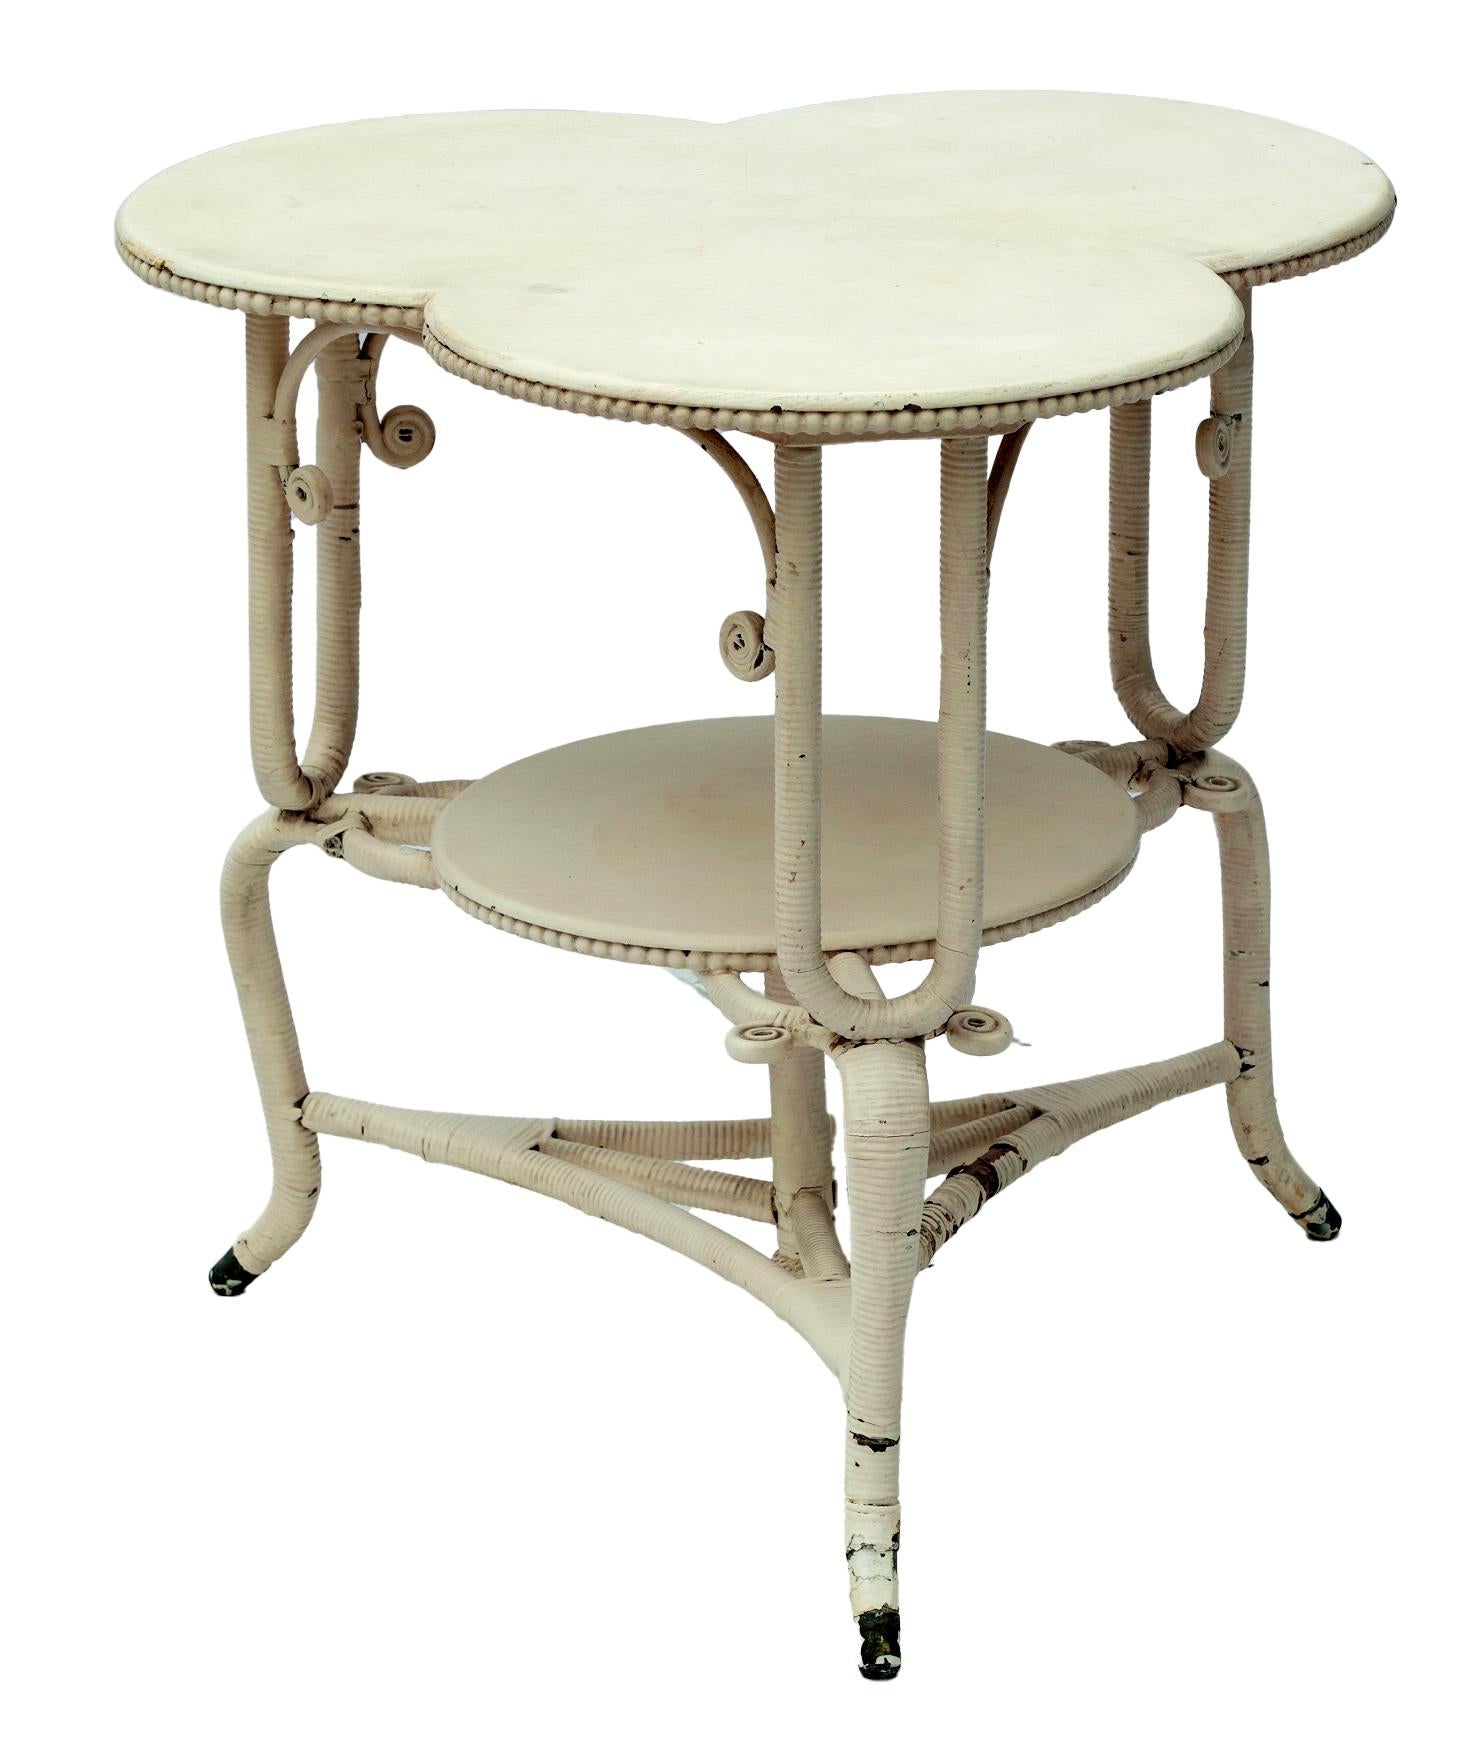 American Antique Clover Leaf Table with Beaded Edge For Sale